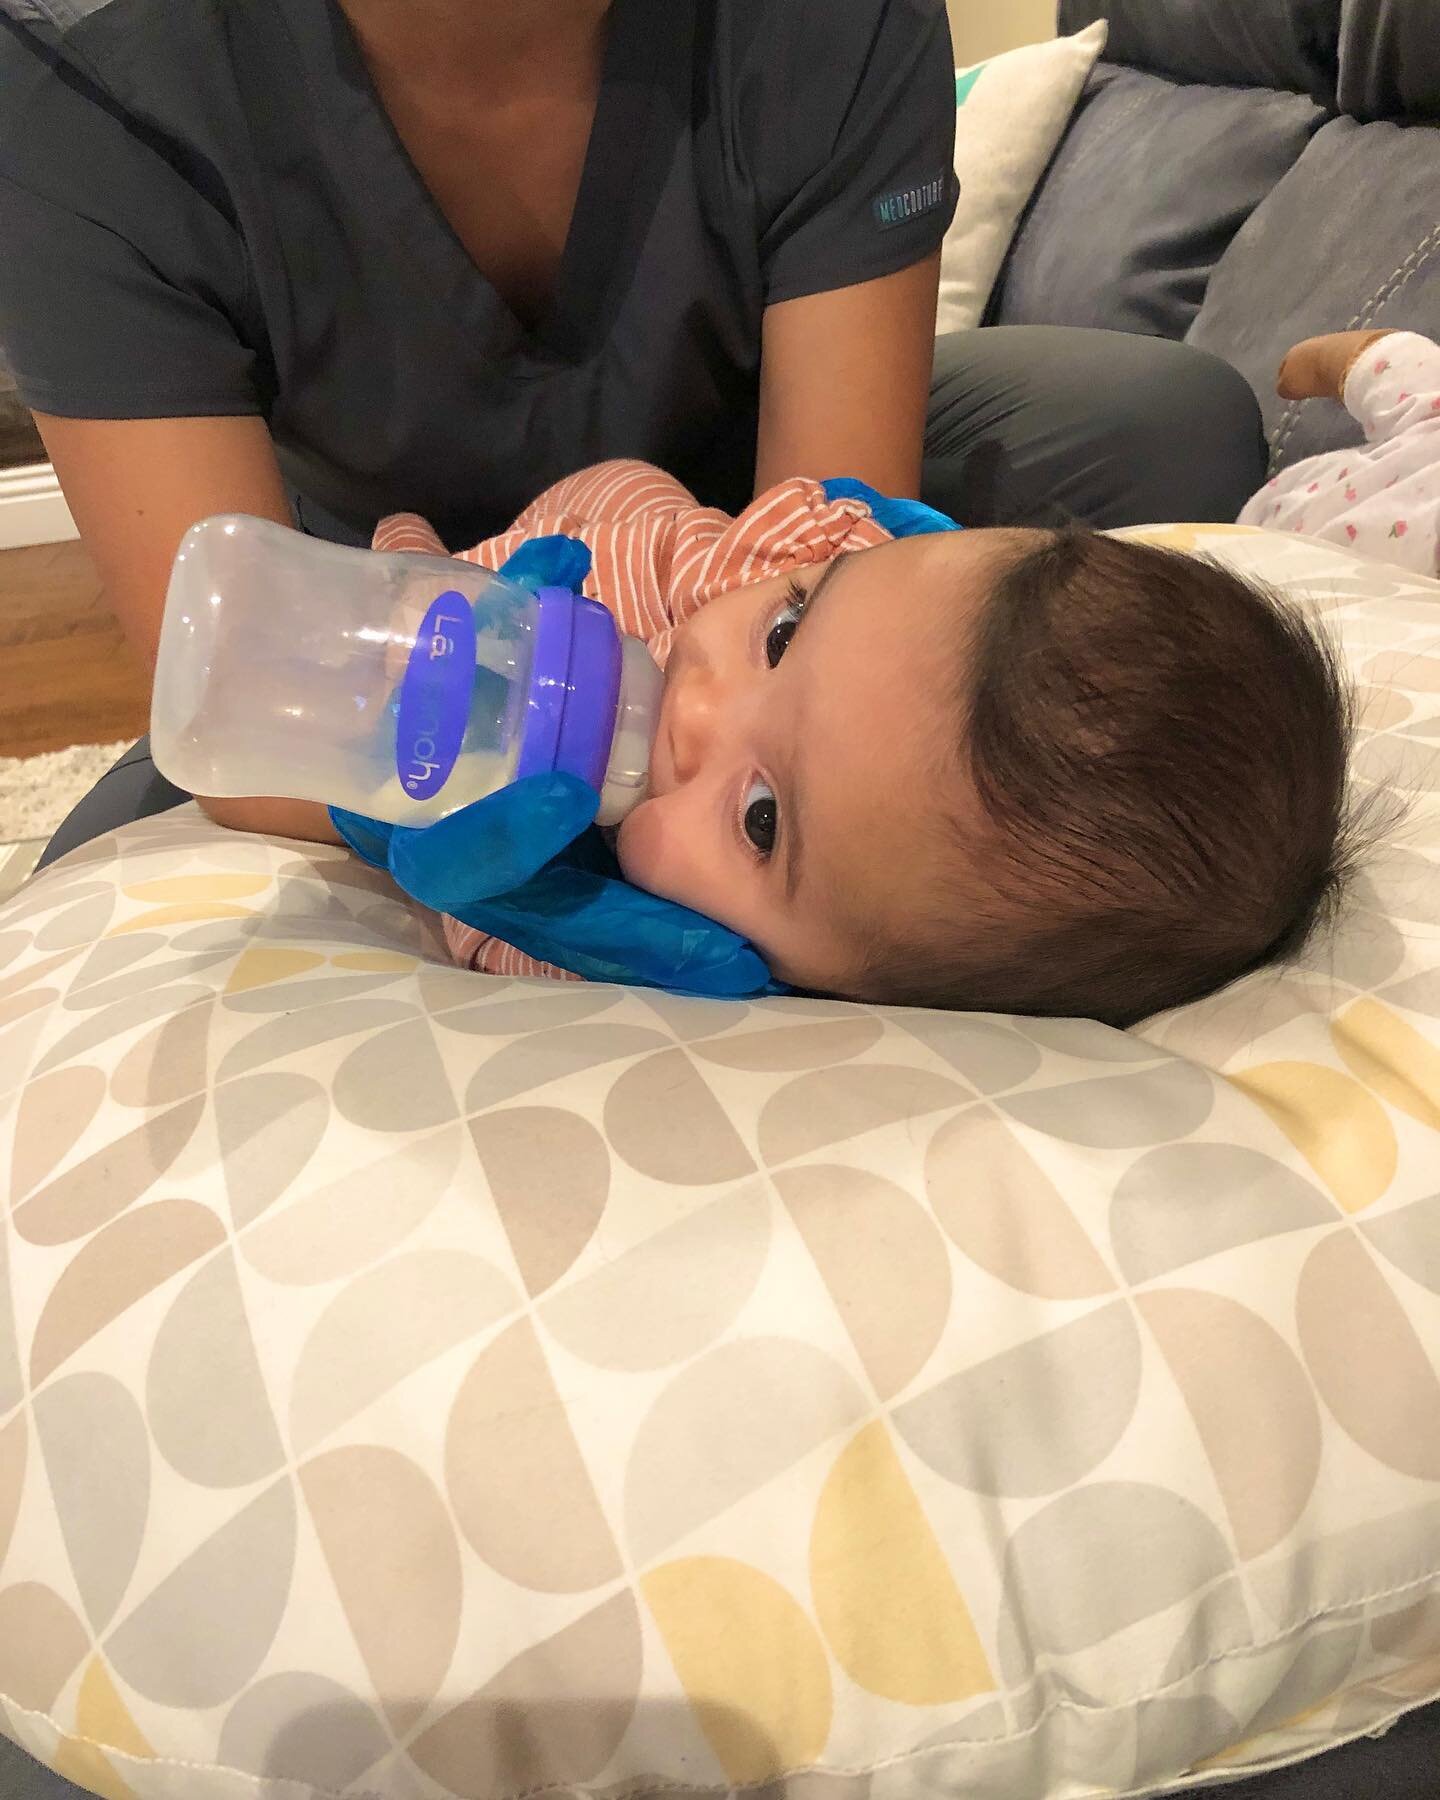 Feeding therapy with 3 month old baby. 

*posted with permission*
#occupationaltherapy #maternalhealth #maternalwellness #feedingtherapy #lactationsupport #bottlefeeding #breastfeeding